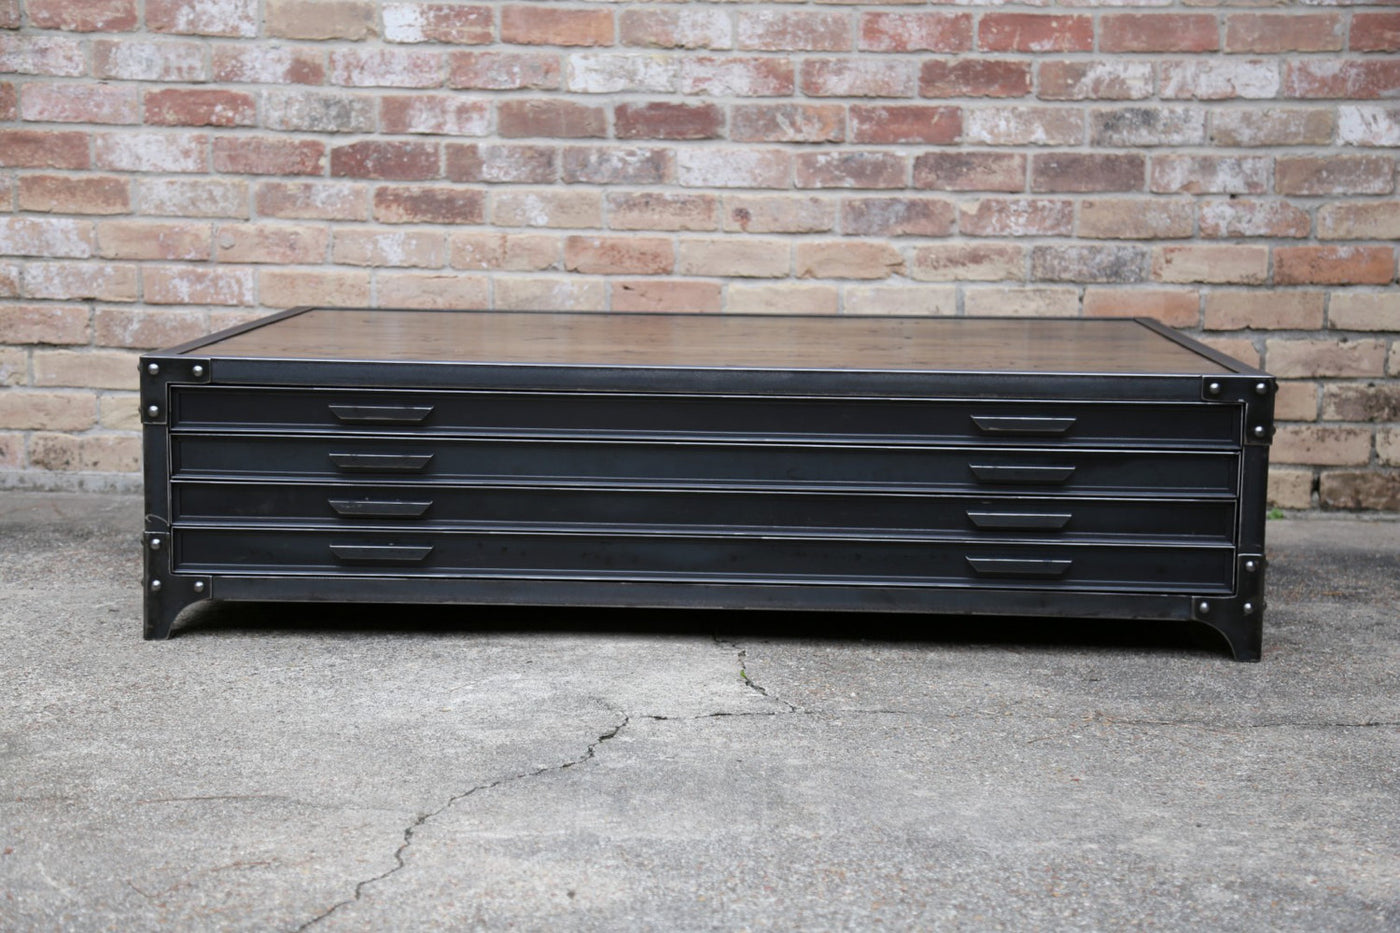 Flat File Industrial Coffee Table